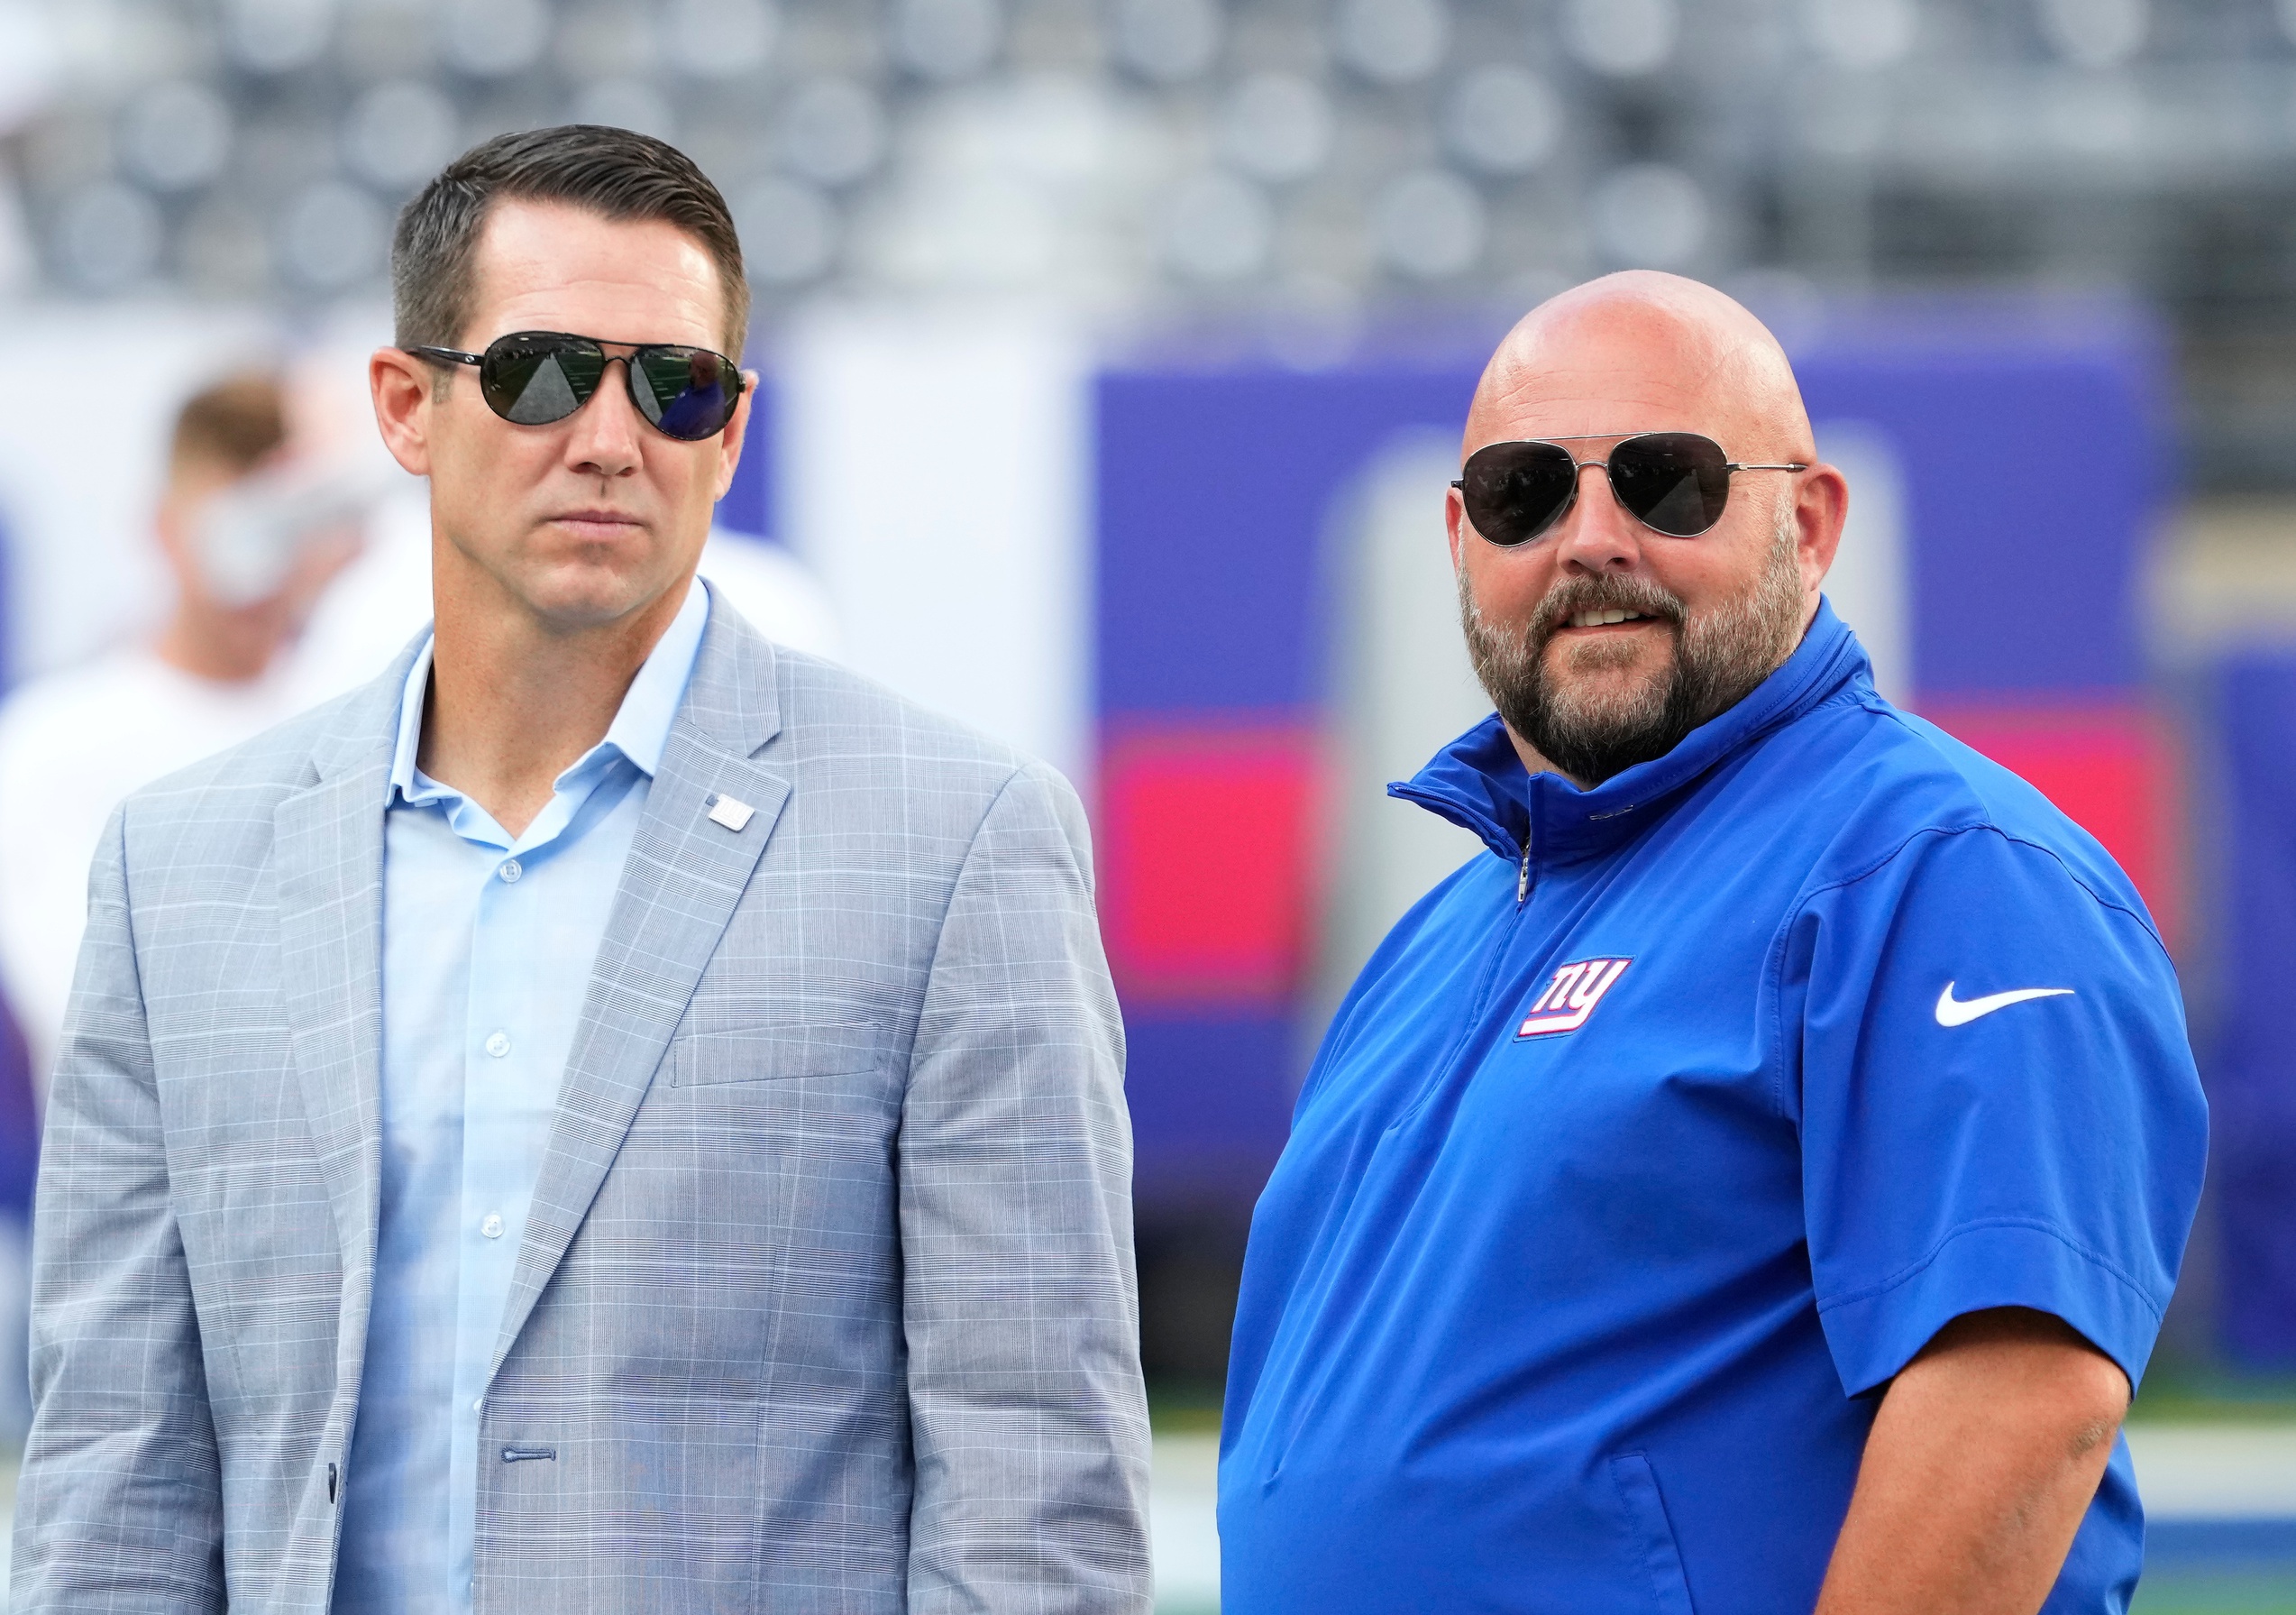 New York Giants head coach Brian Daboll (right) and general manager Joe Schoen (left) talk before a game against the New York Jets at MetLife Stadium.